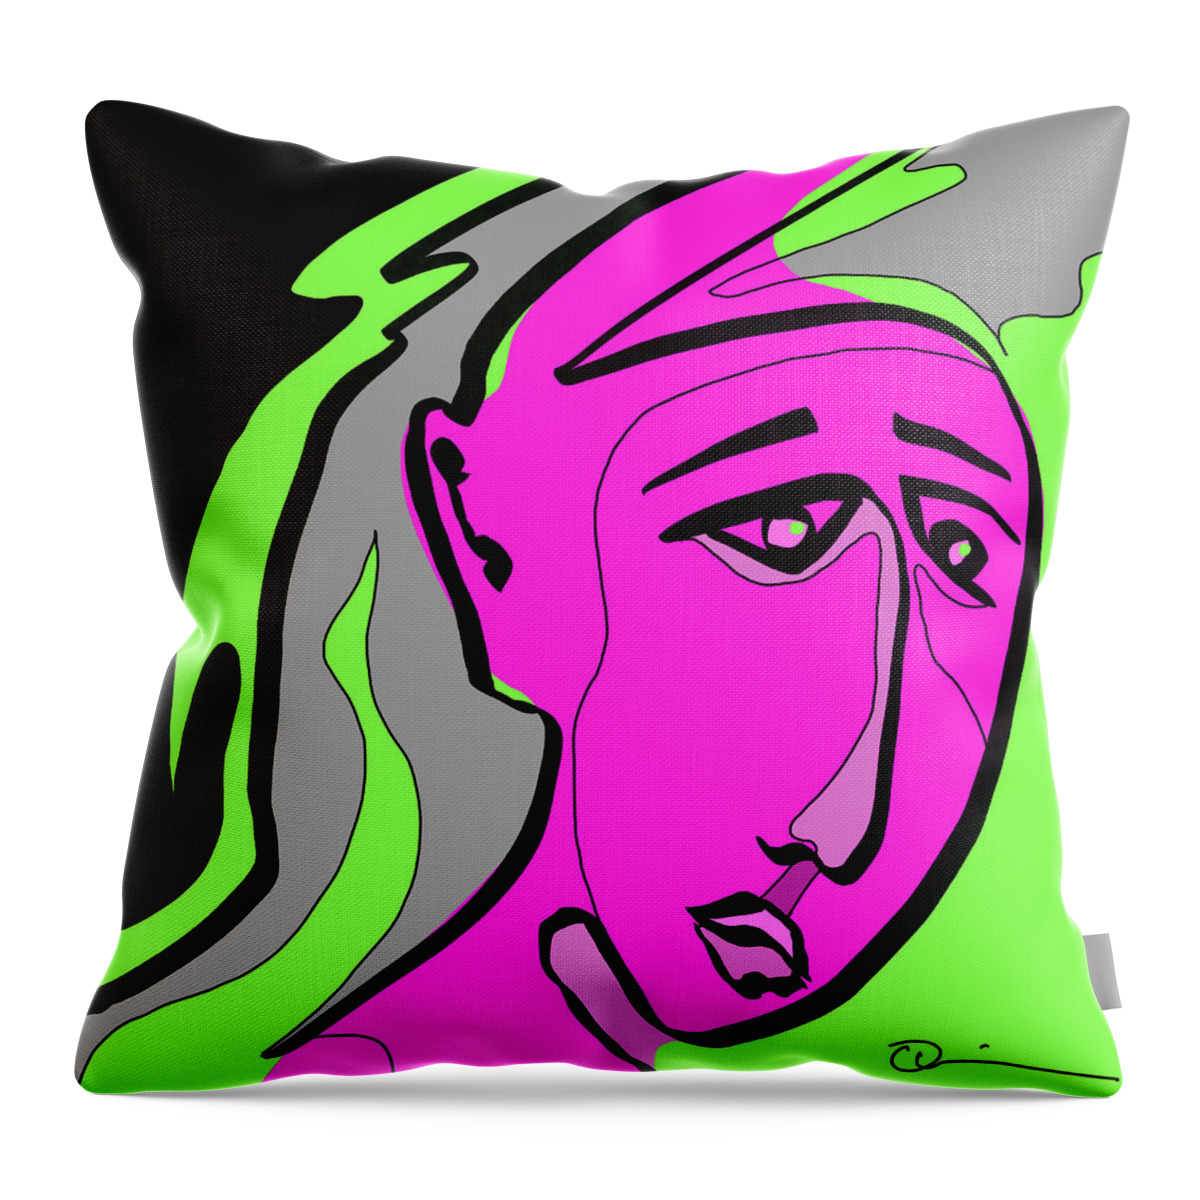 Quiros Throw Pillow featuring the digital art Tumult by Jeffrey Quiros